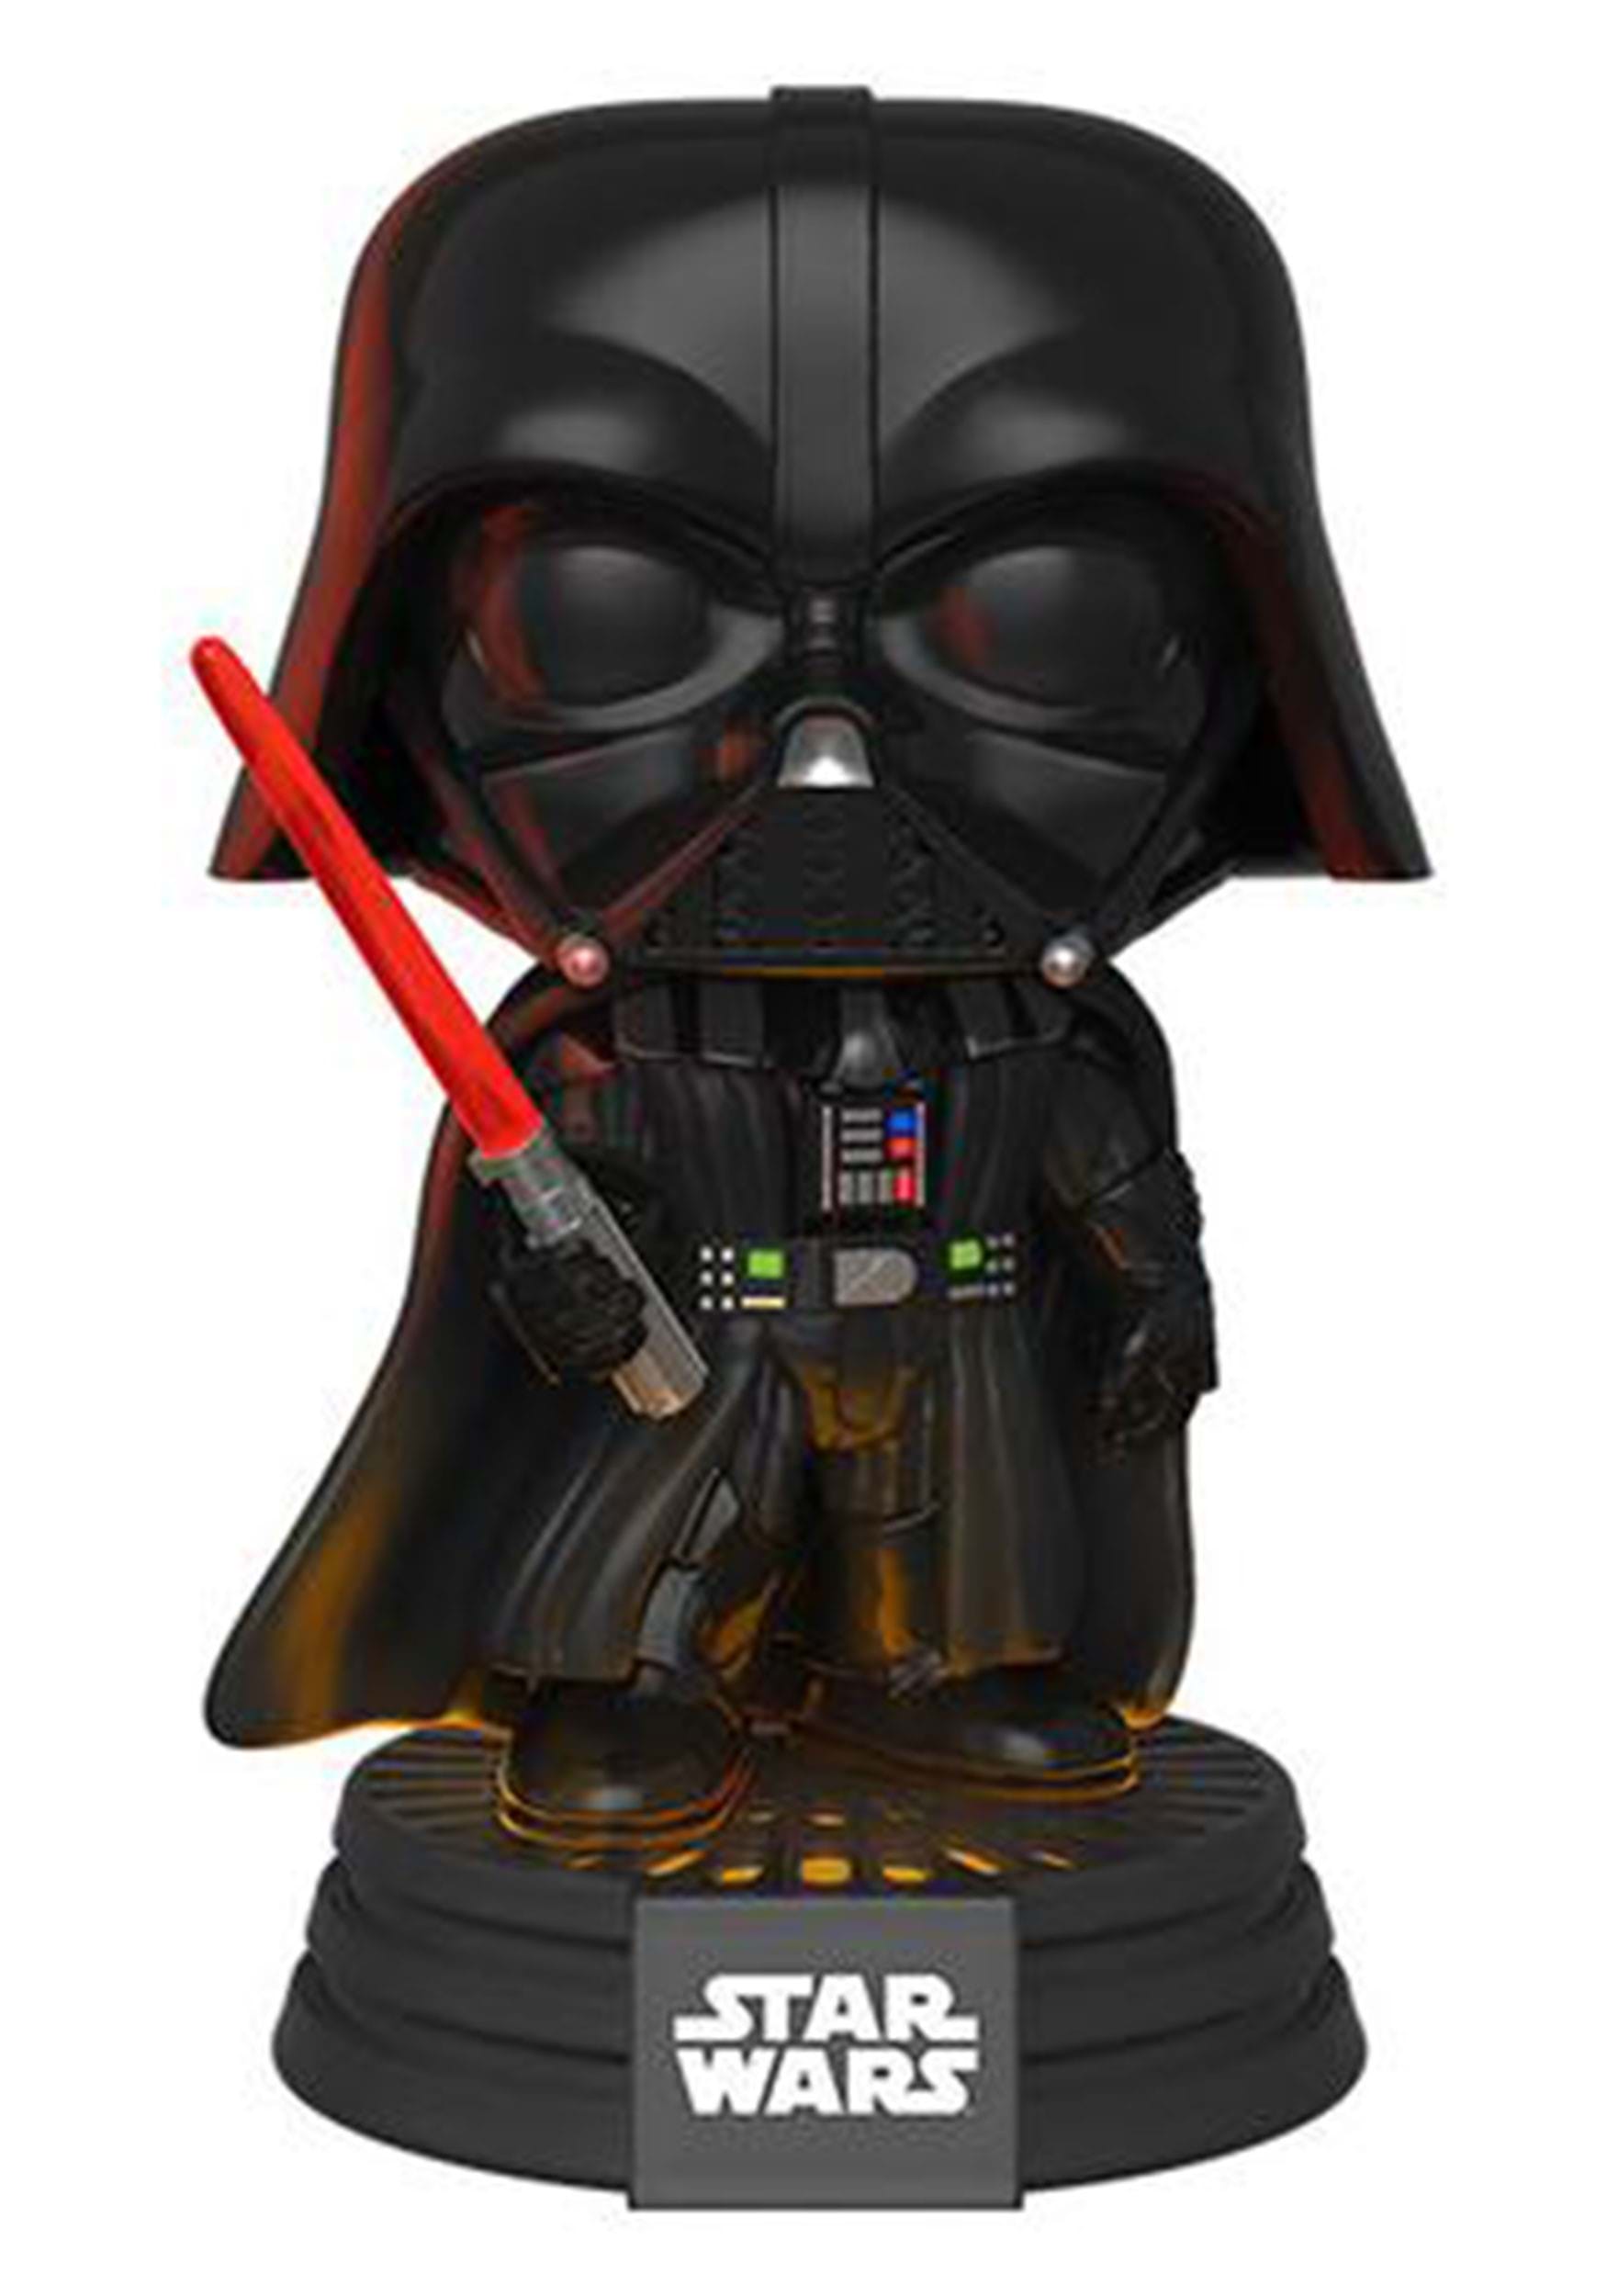 https://images.fun.com/products/64567/2-1-169232/pop-star-wars-darth-vader-electronic-lights-and-alt-1.jpg